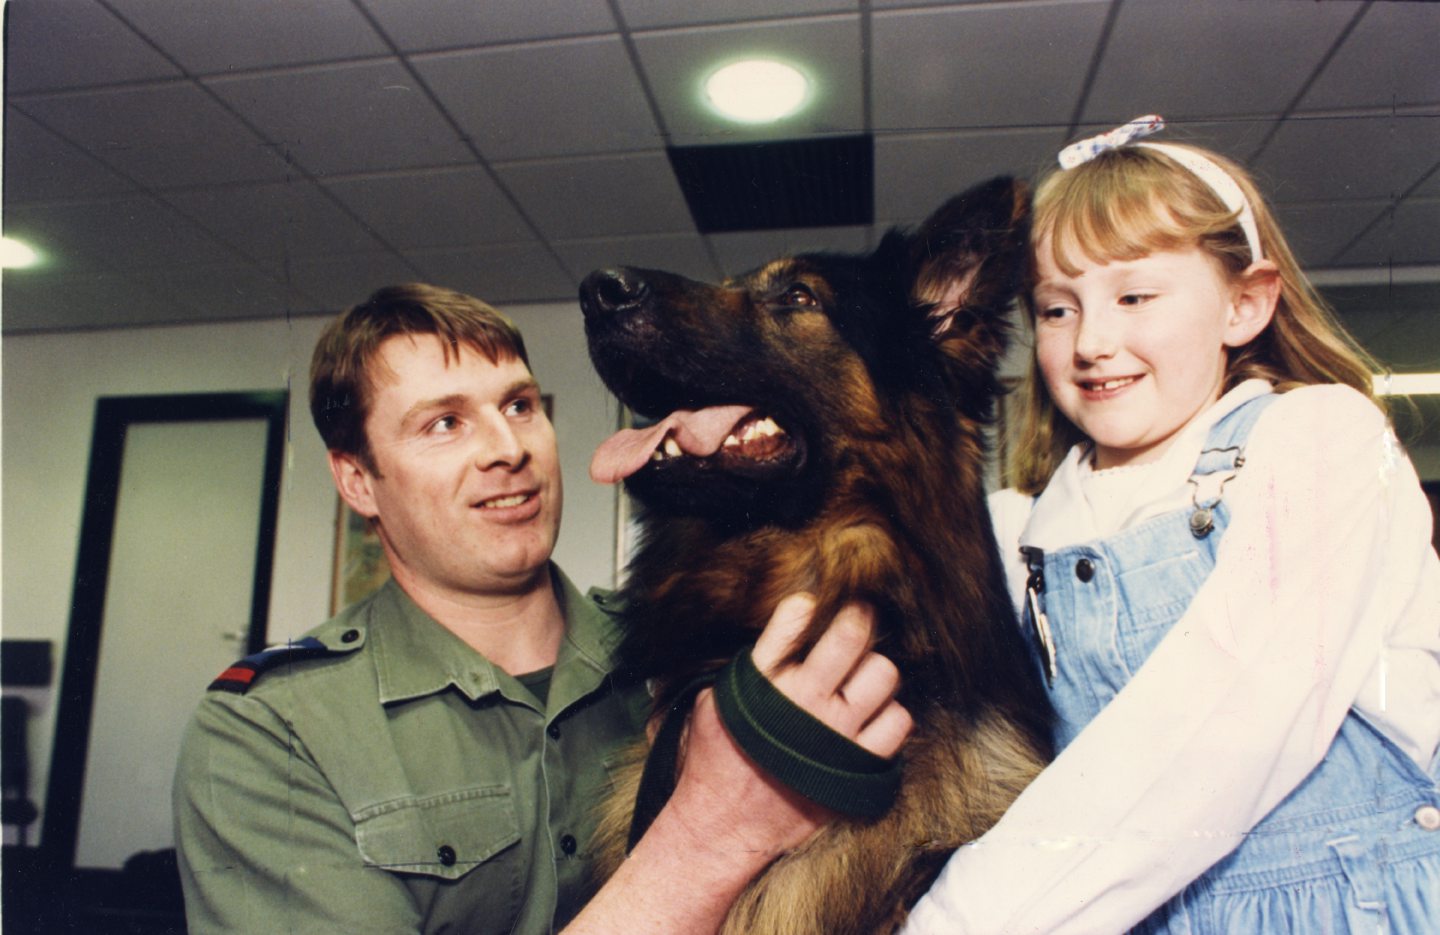 Dr Gray's Hospital patient Fiona Urquhart, 7 cuddles RAF Police dog Banjo, held by Cpl Ian Booth." Picture taken 27 March 1990.